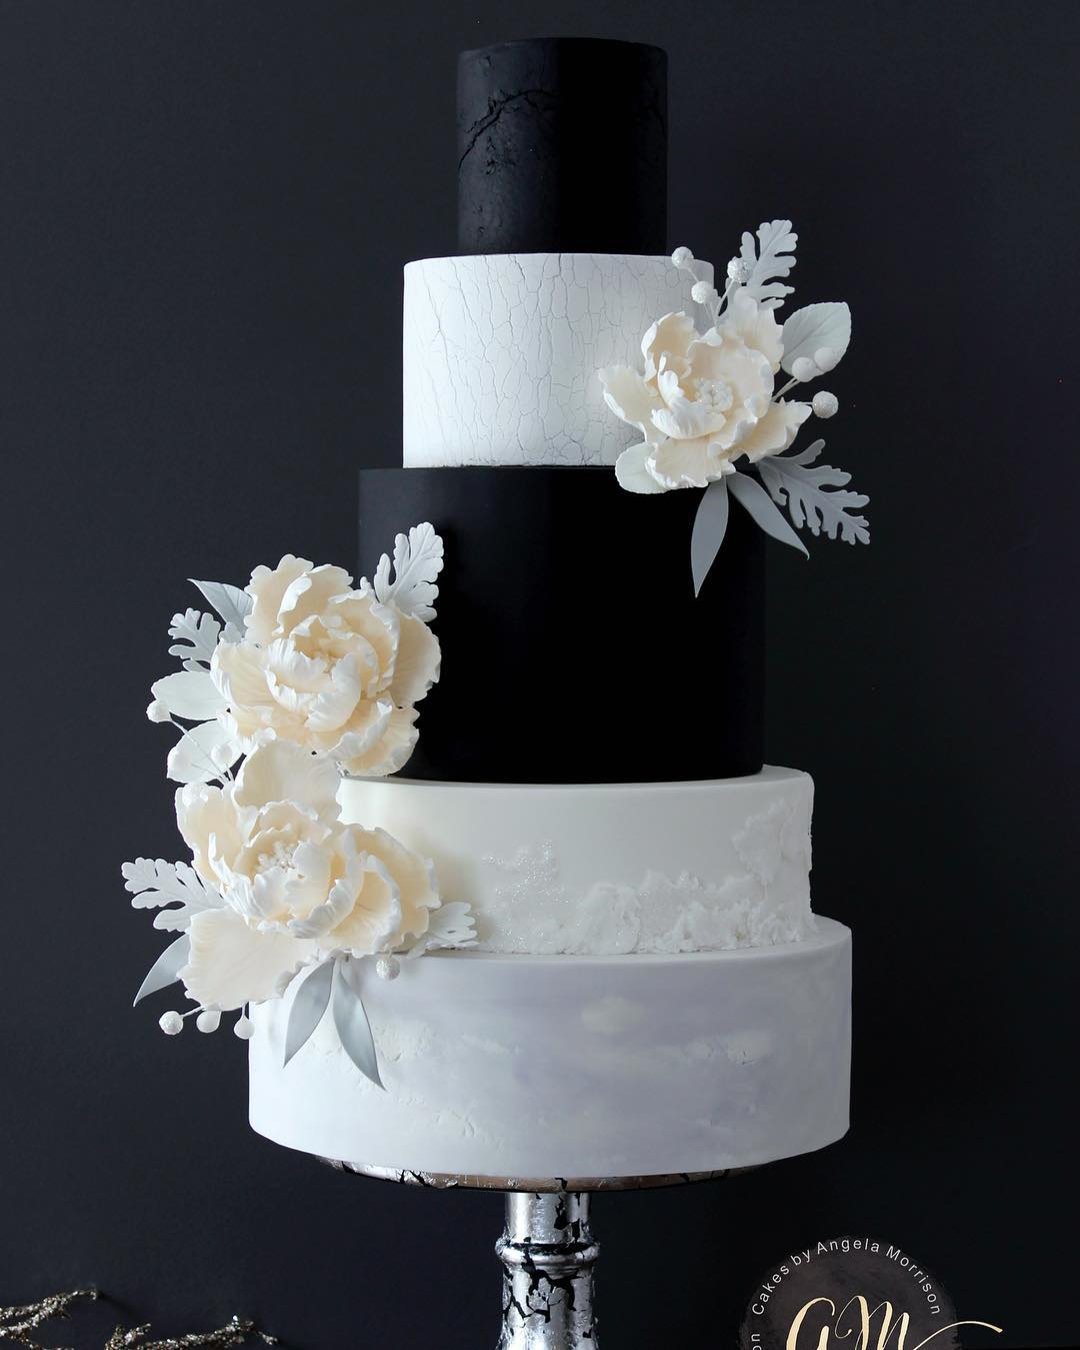 black and white wedding cakes minimalistic black and white cakesblack and white wedding cakes wedding cakes with flowers